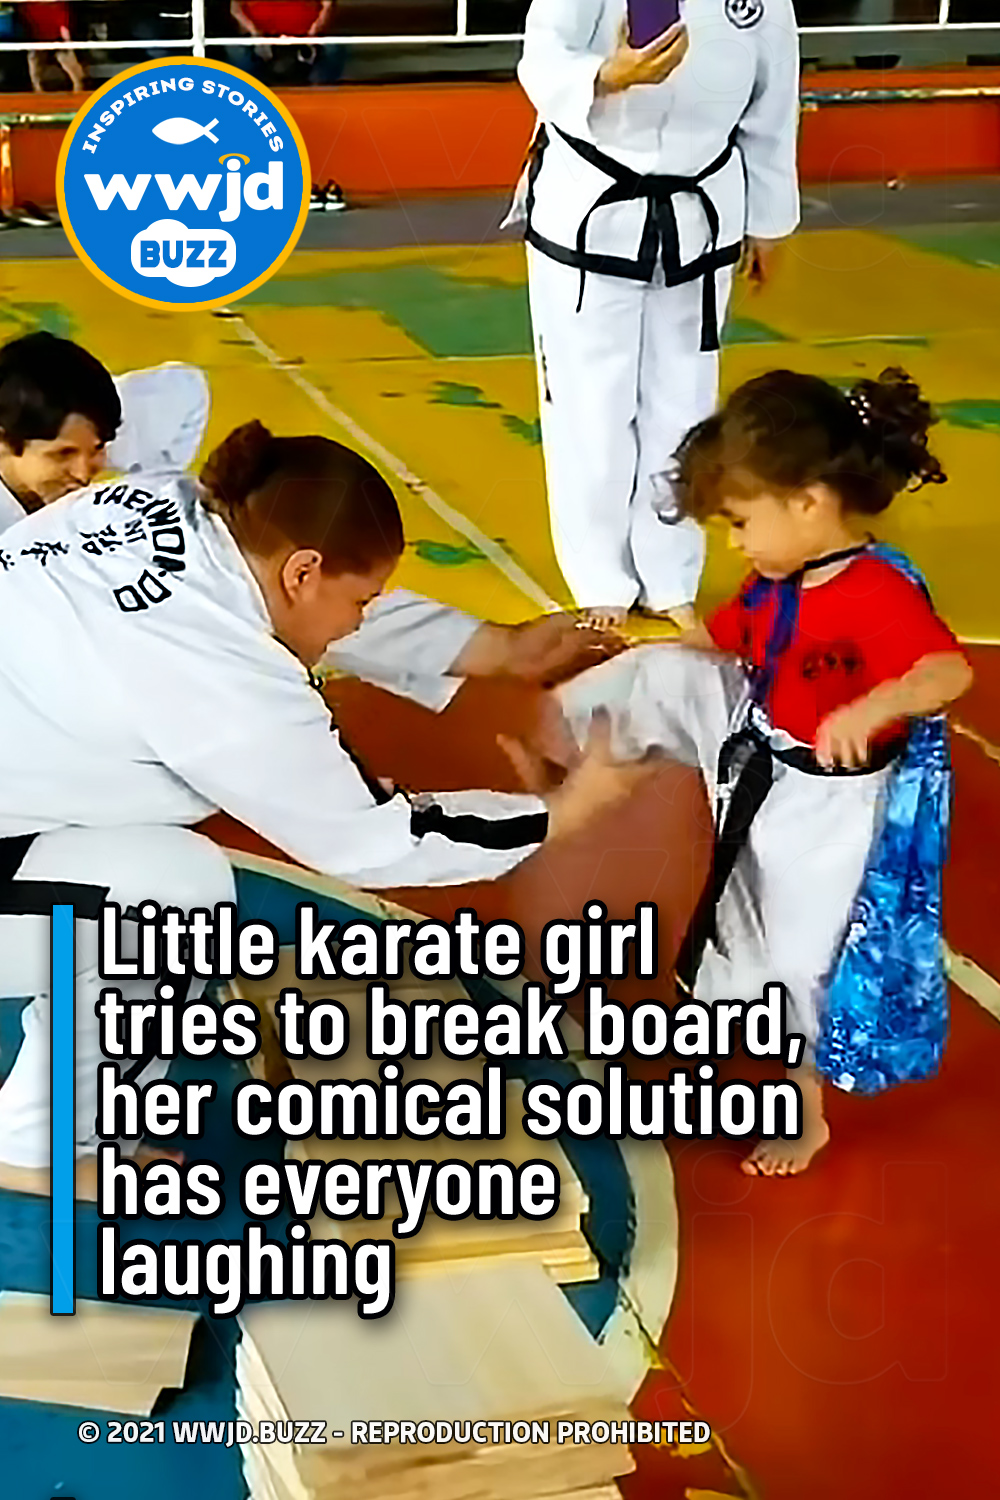 Little karate girl tries to break board, her comical solution has everyone laughing